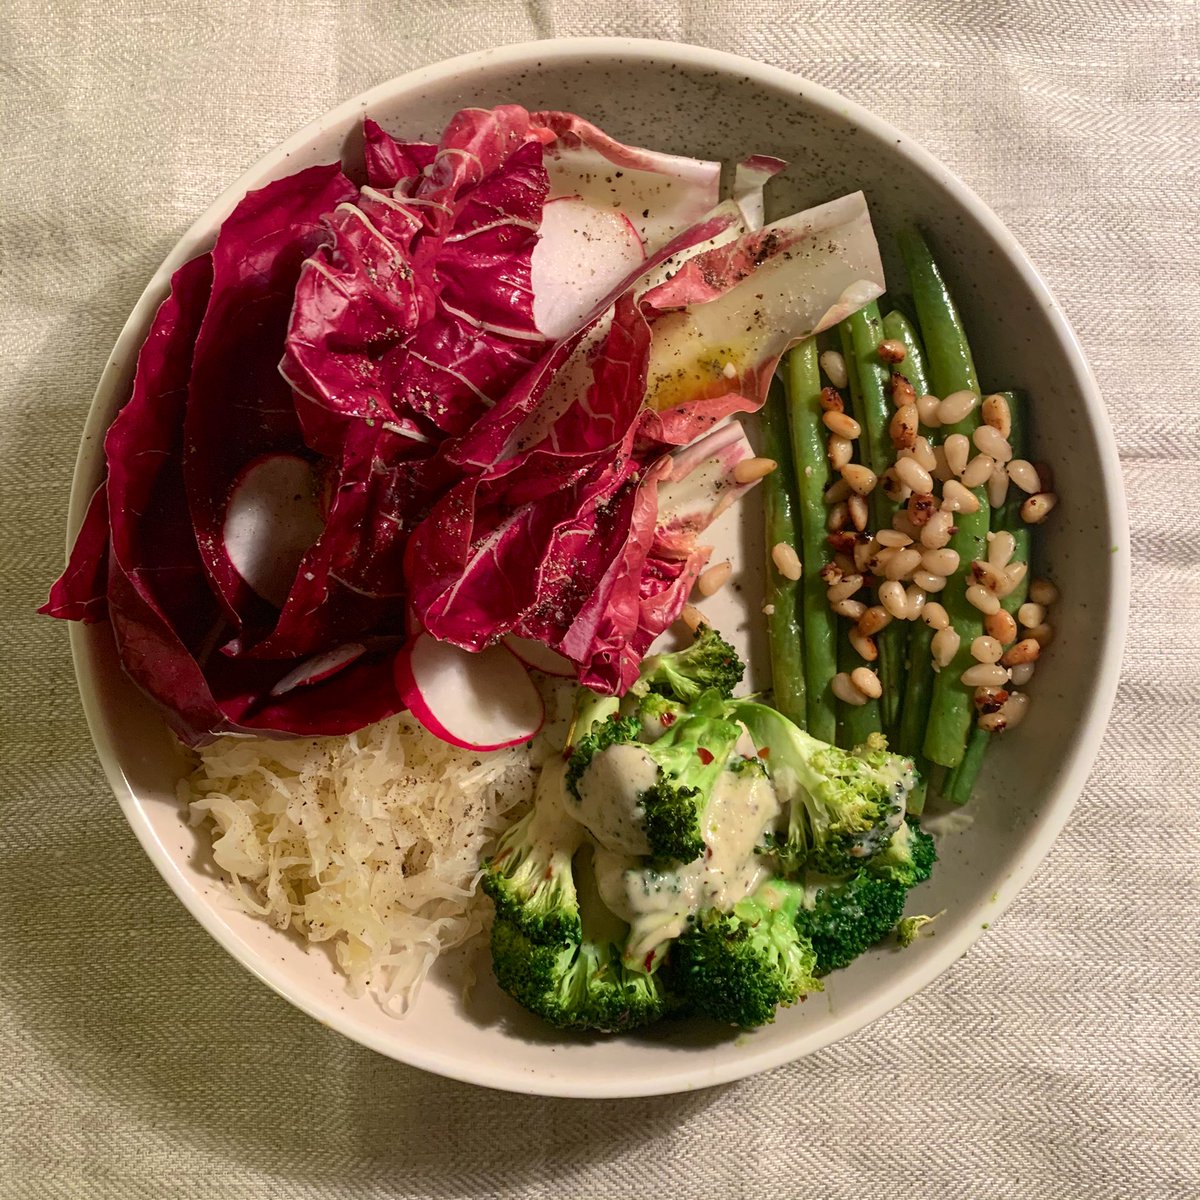 this is a 10pm dinner. i felt like green veggies so i made brocc with tahini chilli dressing and beans with pine nuts and garlic. and radicchio and radishes and kraut. thank u satan for your gifts